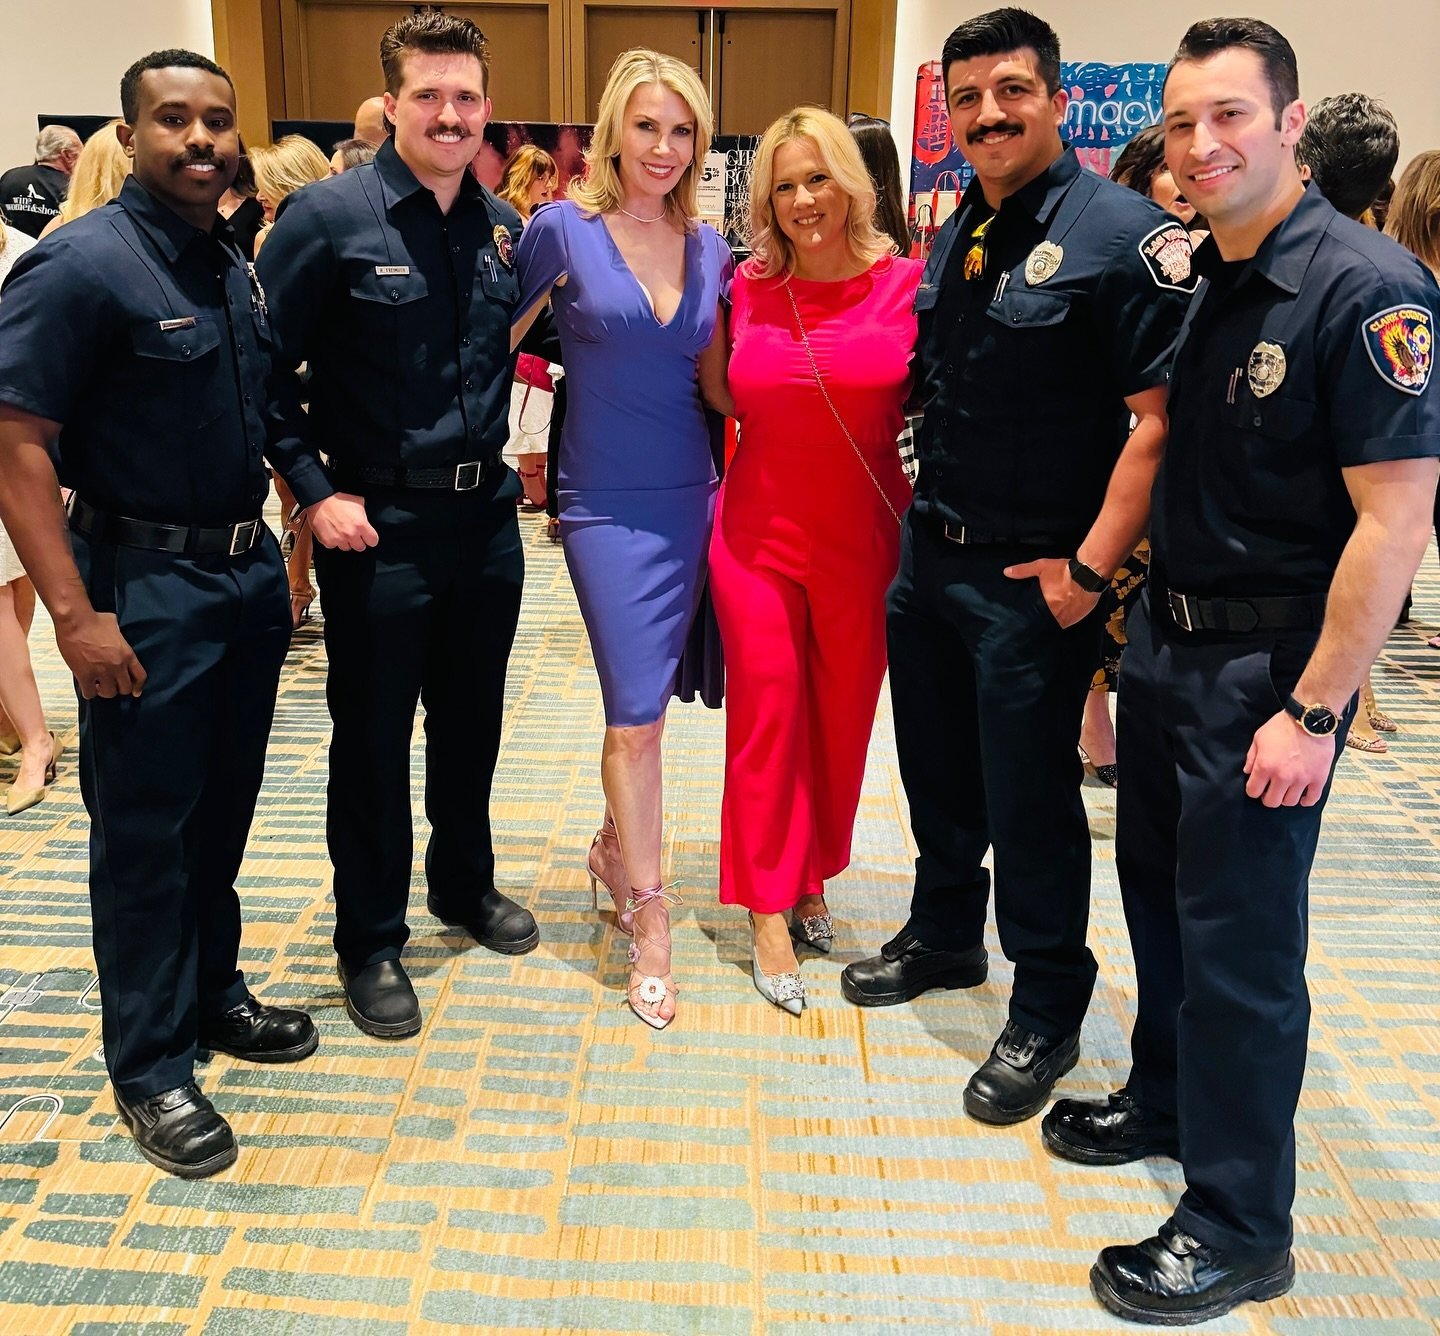 The Las Vegas Fashion Council is delighted to support the @theburnfoundation with its annual #FirefighterAuction coming up on June 7th. The firefighters have been making their way around town to highlight the bachelors at multiple Las Vegas Fashion C